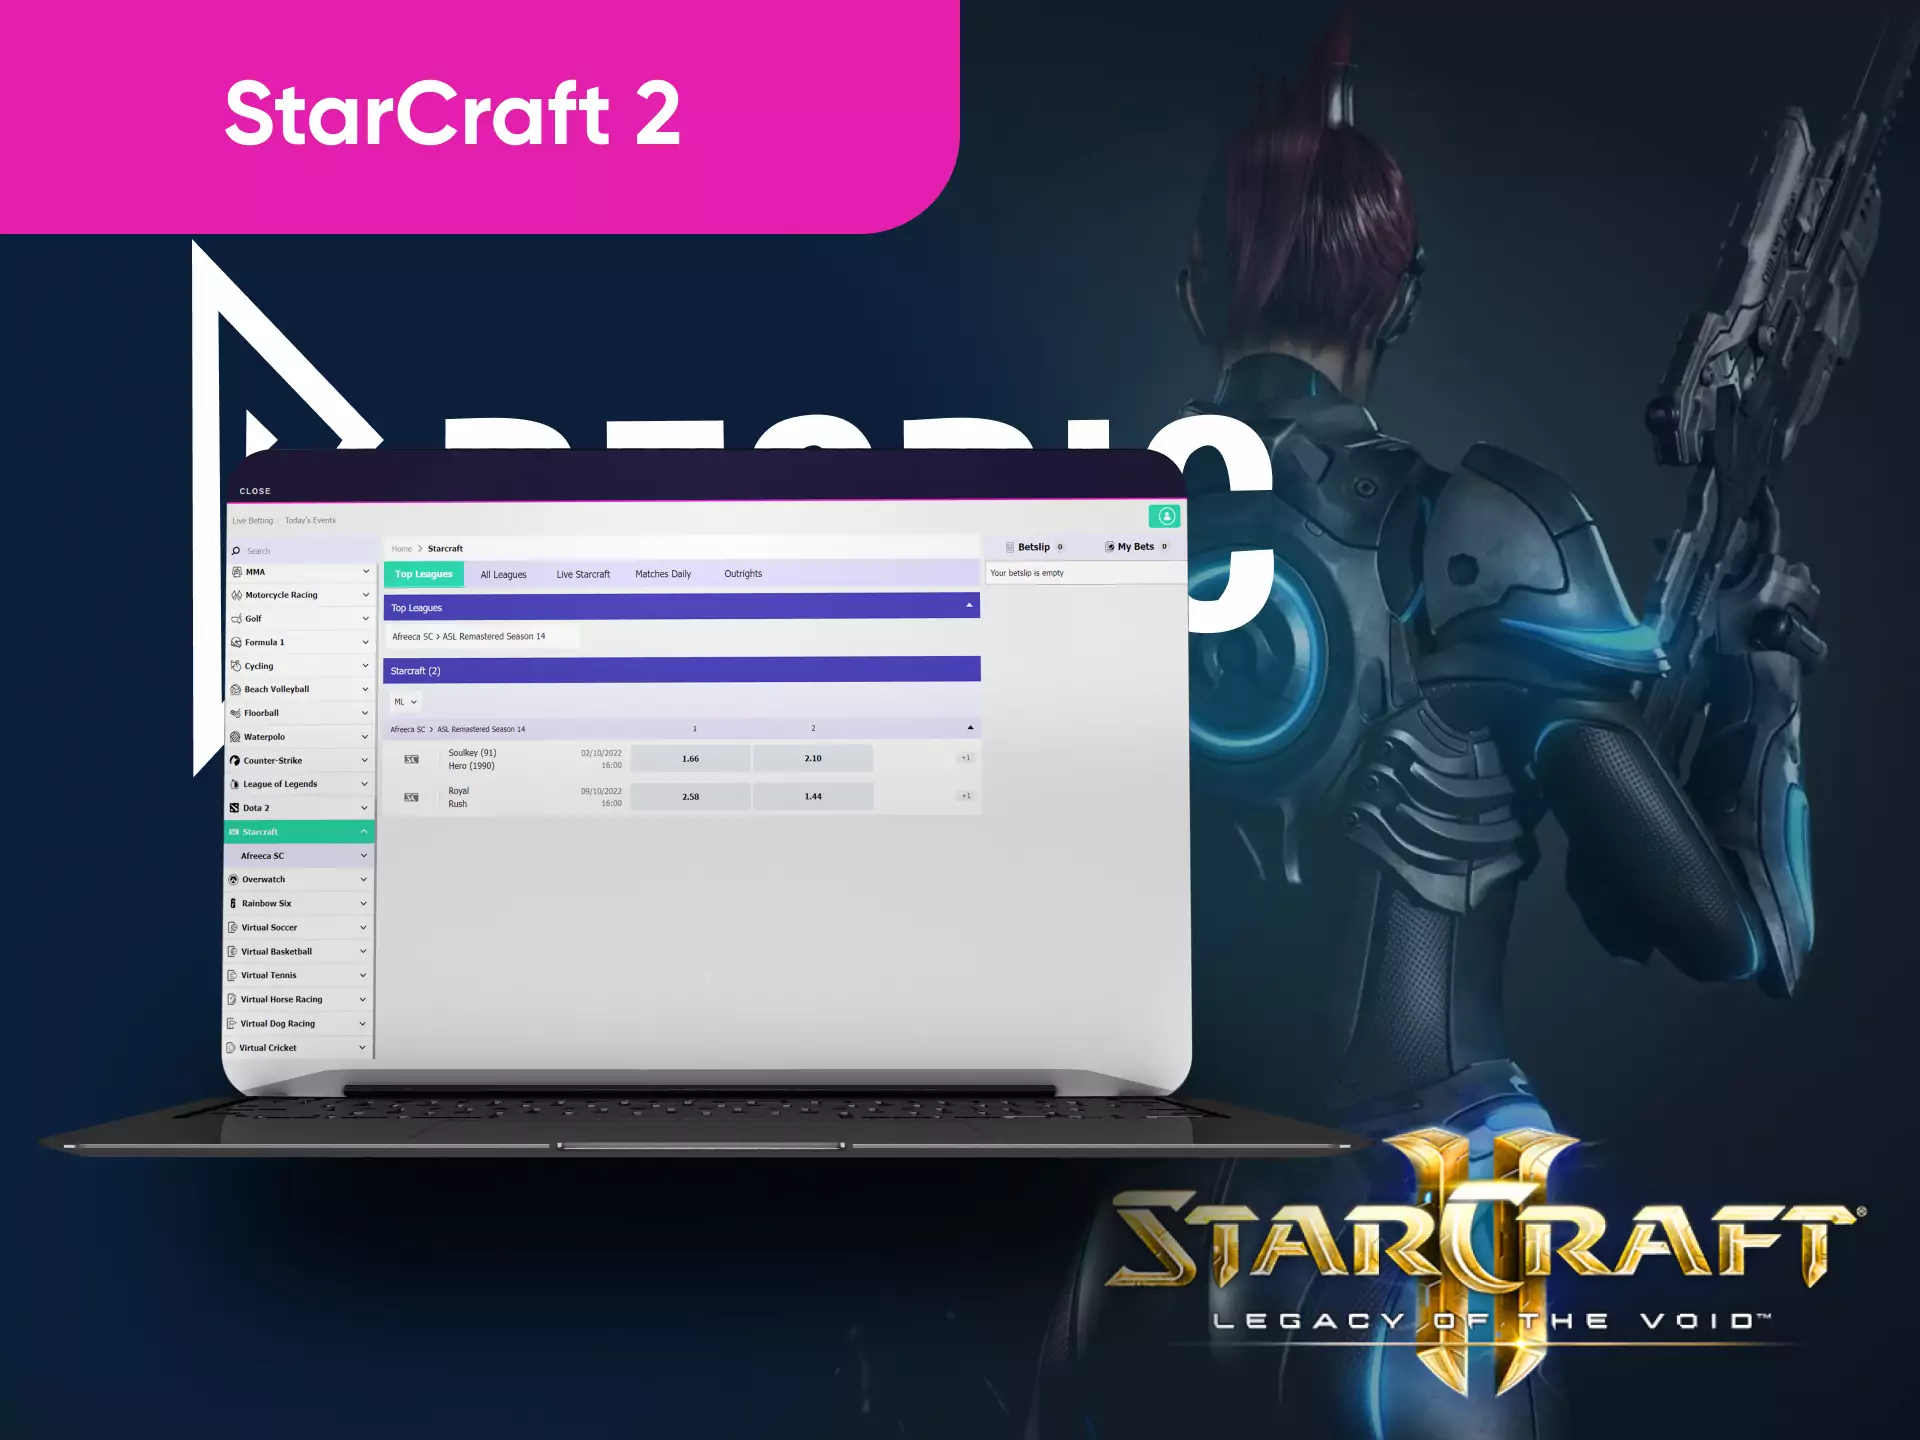 In the Becric sportsbook, you find Starcraft events you can place a bet on.